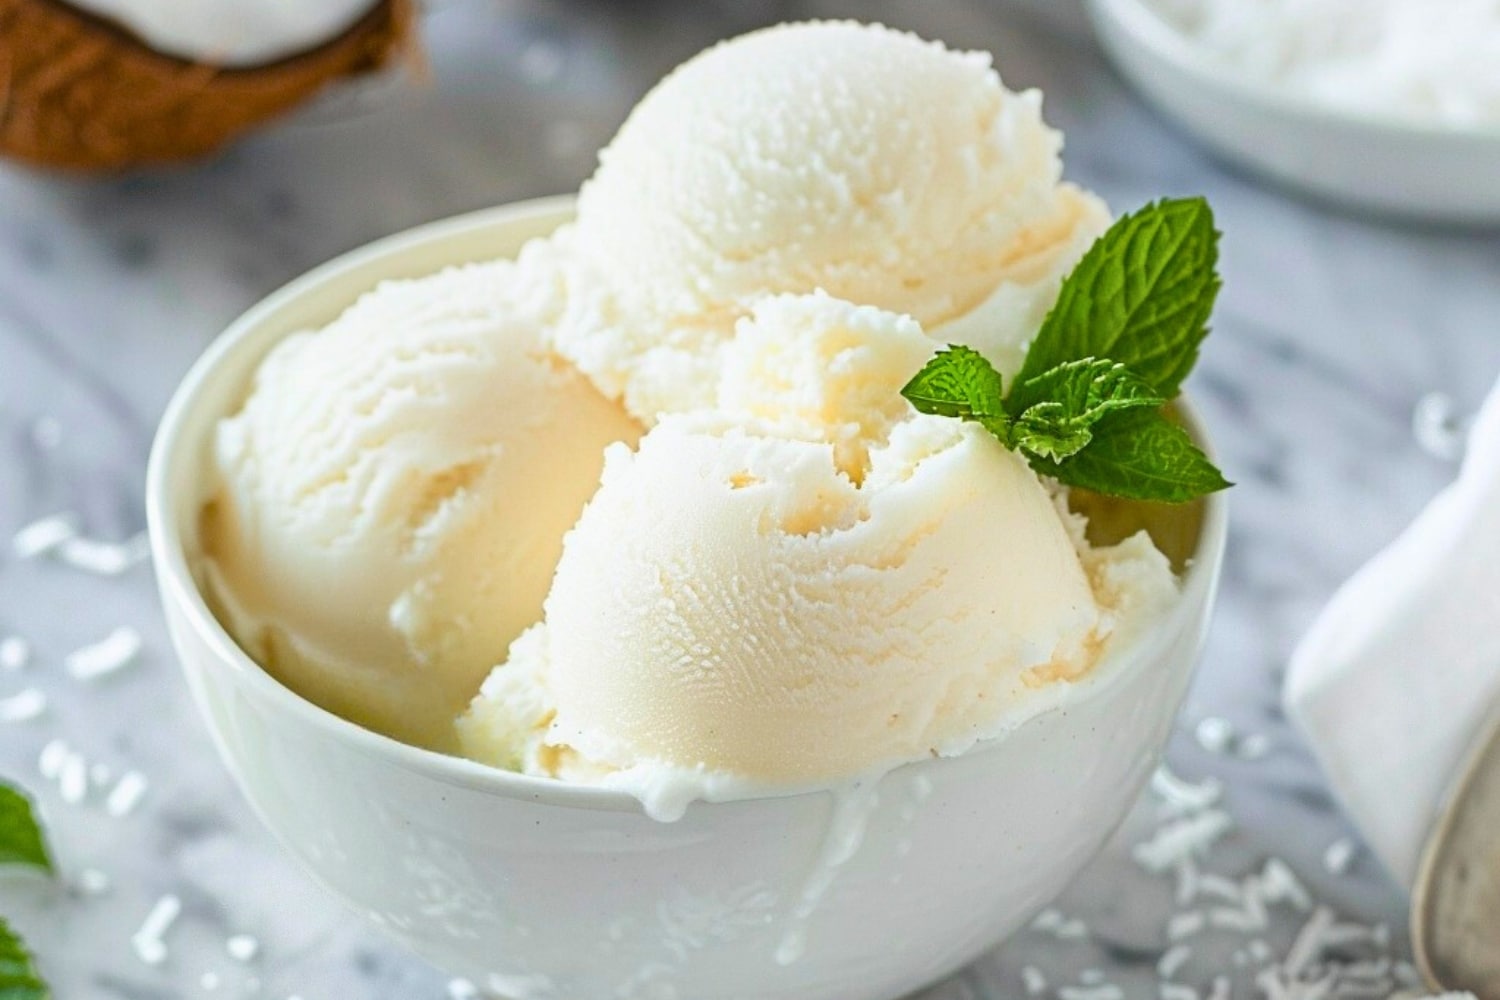 White bowl with scoops of coconut sorbet garnished with mint leaves.